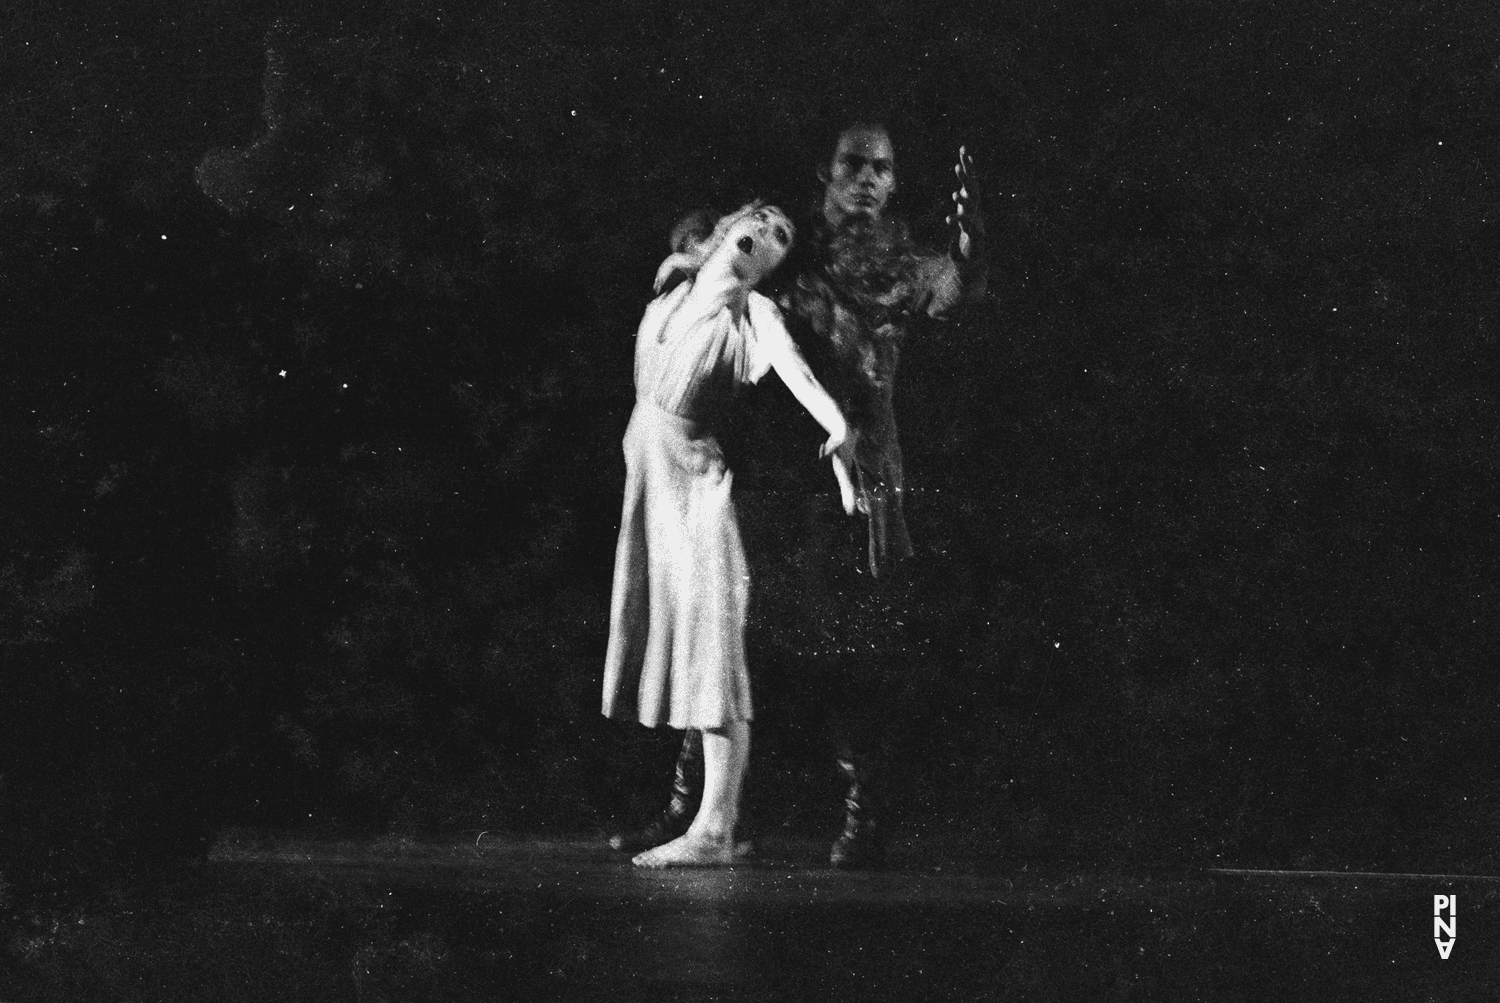 Carlos Orta and Vivienne Newport in “Wiegenlied” by Pina Bausch